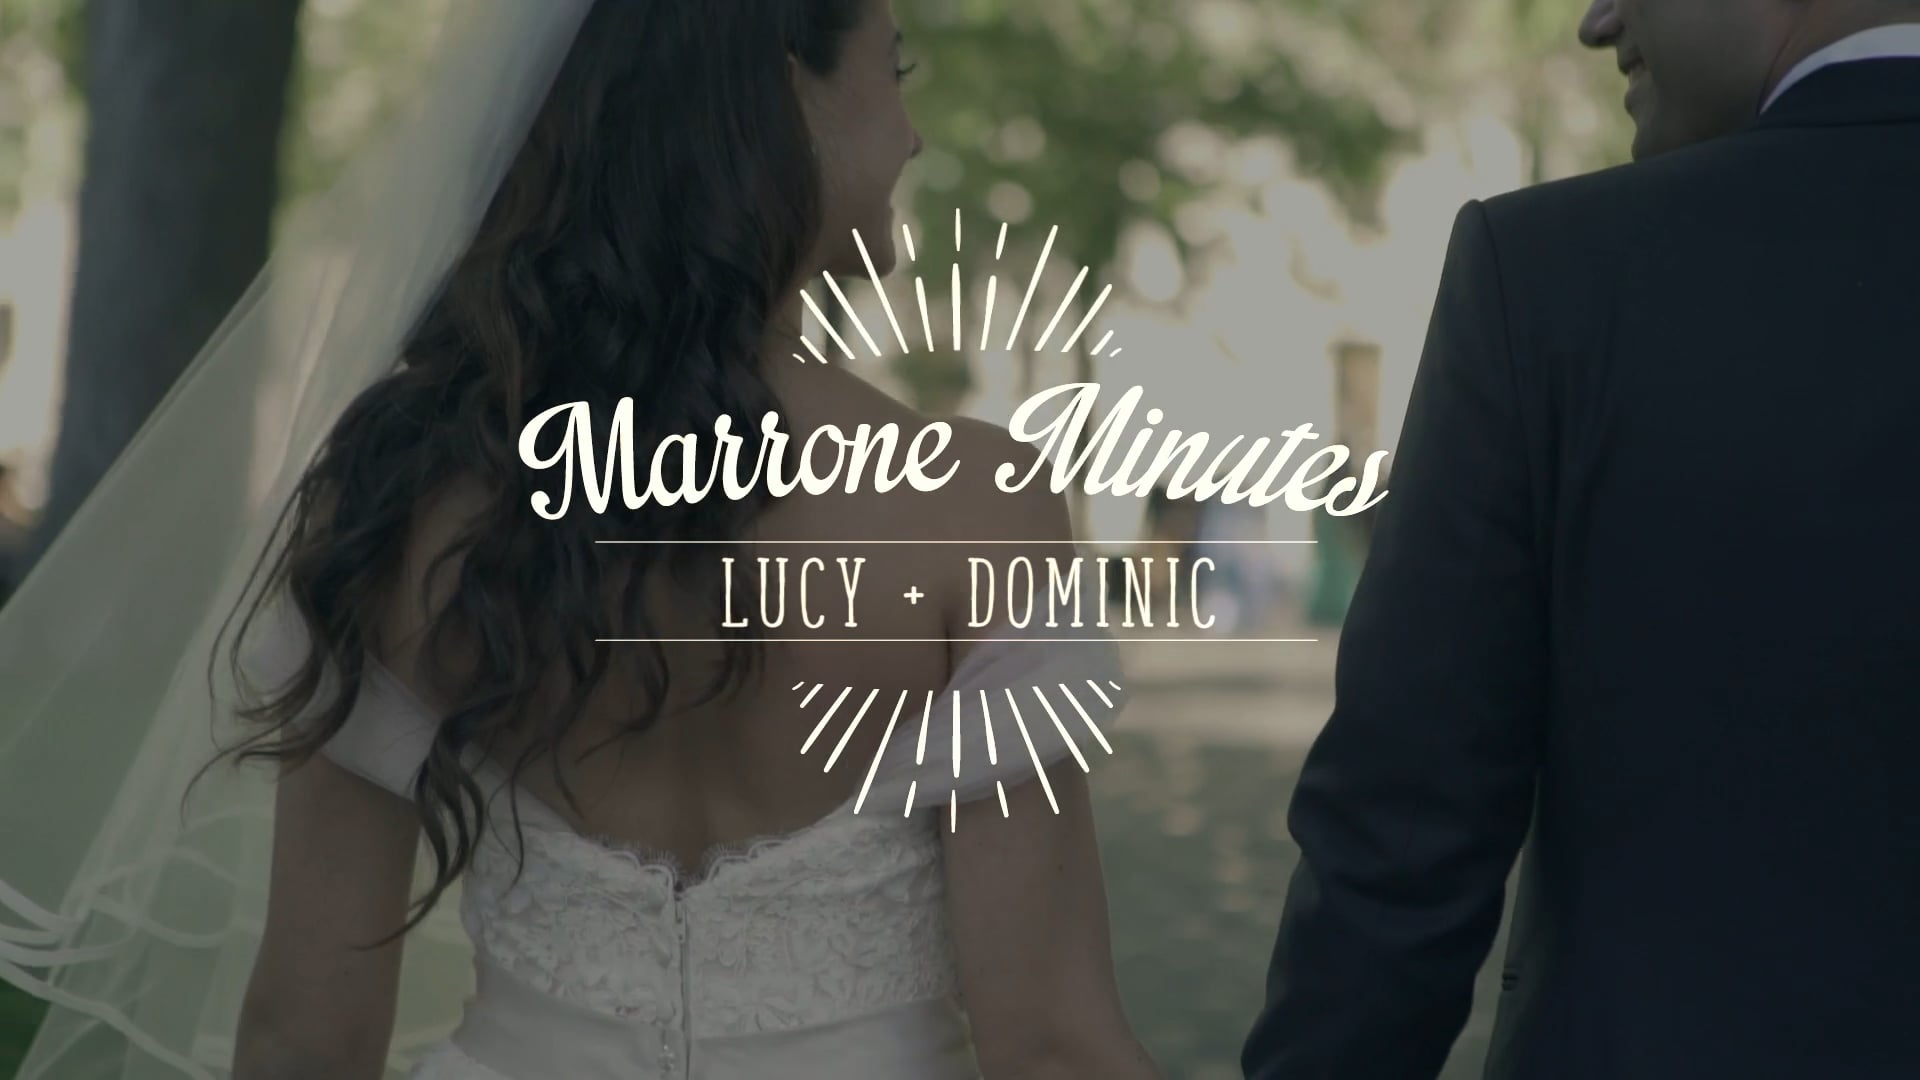 Lucy & Dominic